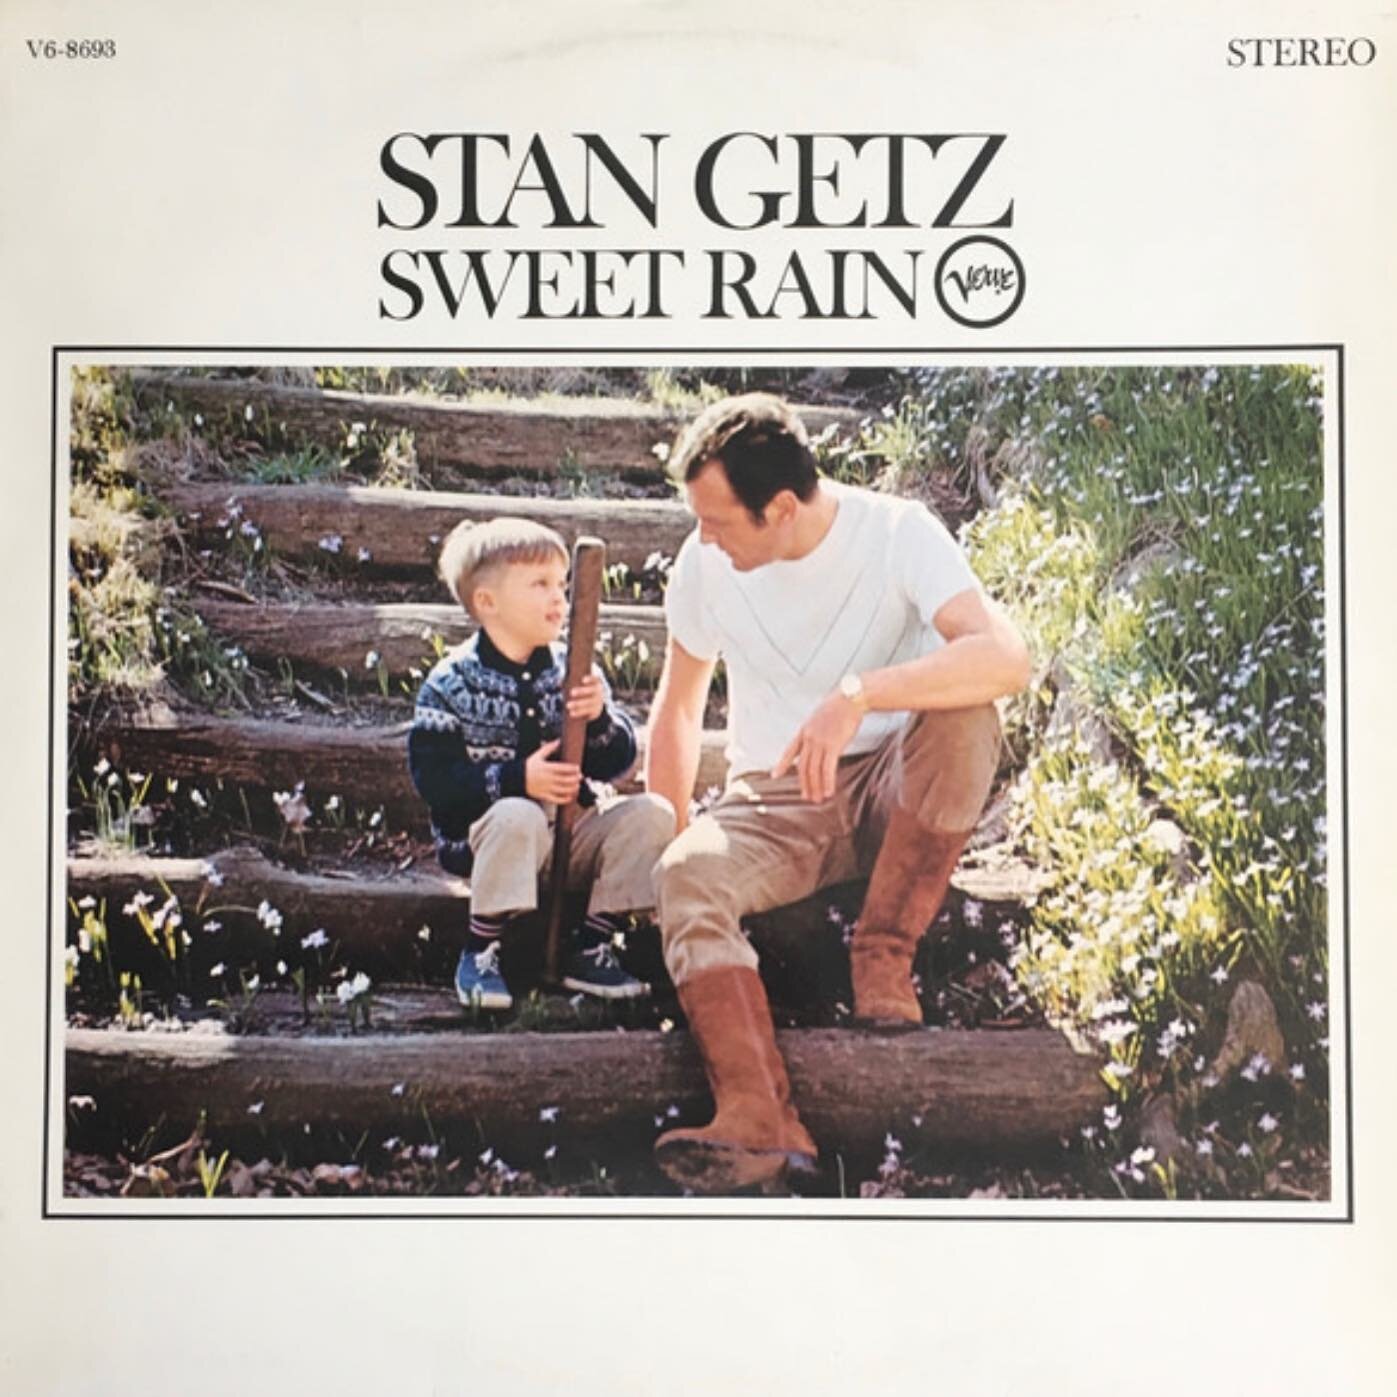 Here is what I have on tap for listening this holiday weekend.  When &quot;Sweet Rain&quot;came out in '67 it blew me away. Everything about Stan's playing is right on and so beautifully expressive. This is probably one of the most stylistically and 